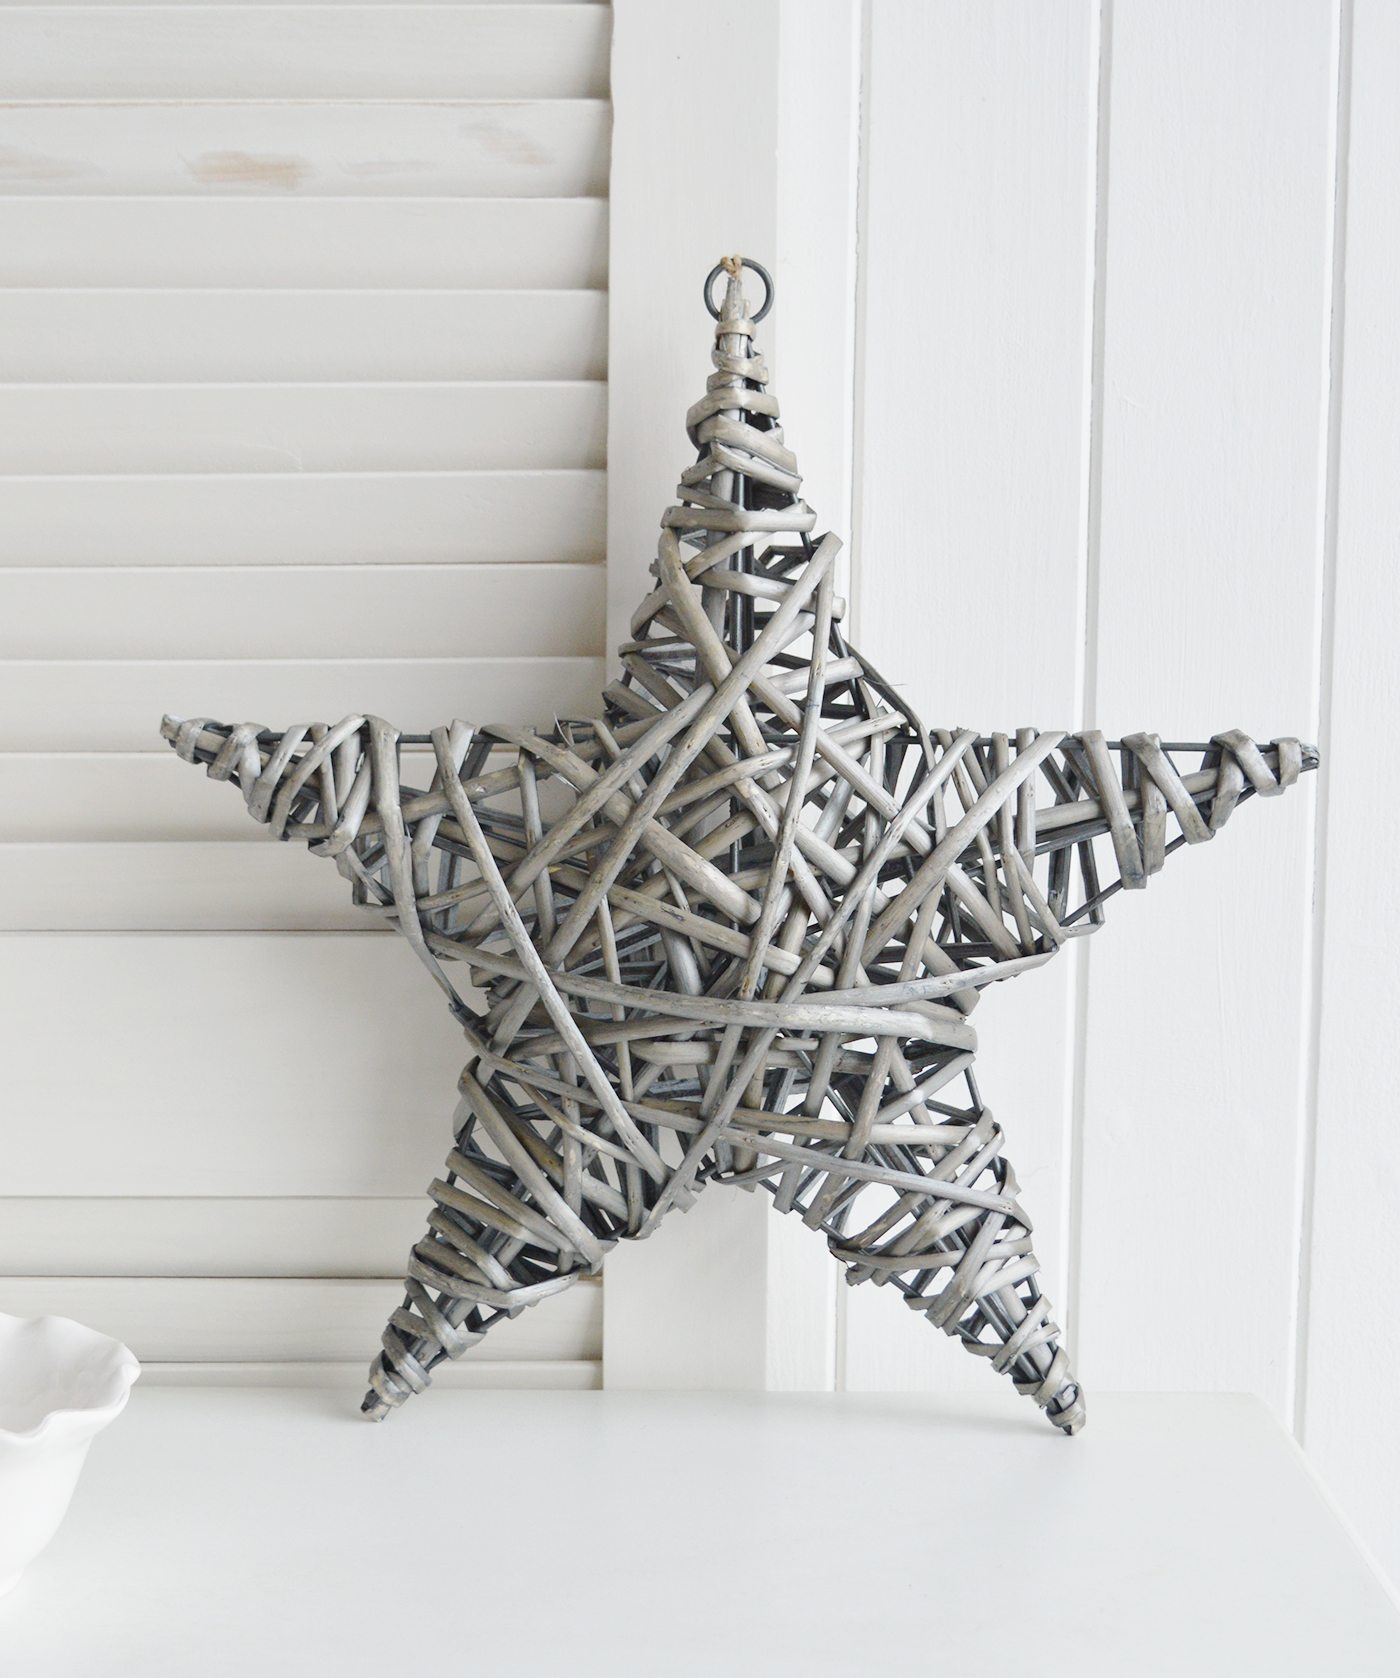 White, New England and Coastal Furniture and accessories for the hallway, living room, bedroom and bathroom. A chunky grey hanging star for coastal, country and farmhouse home decor and interiors